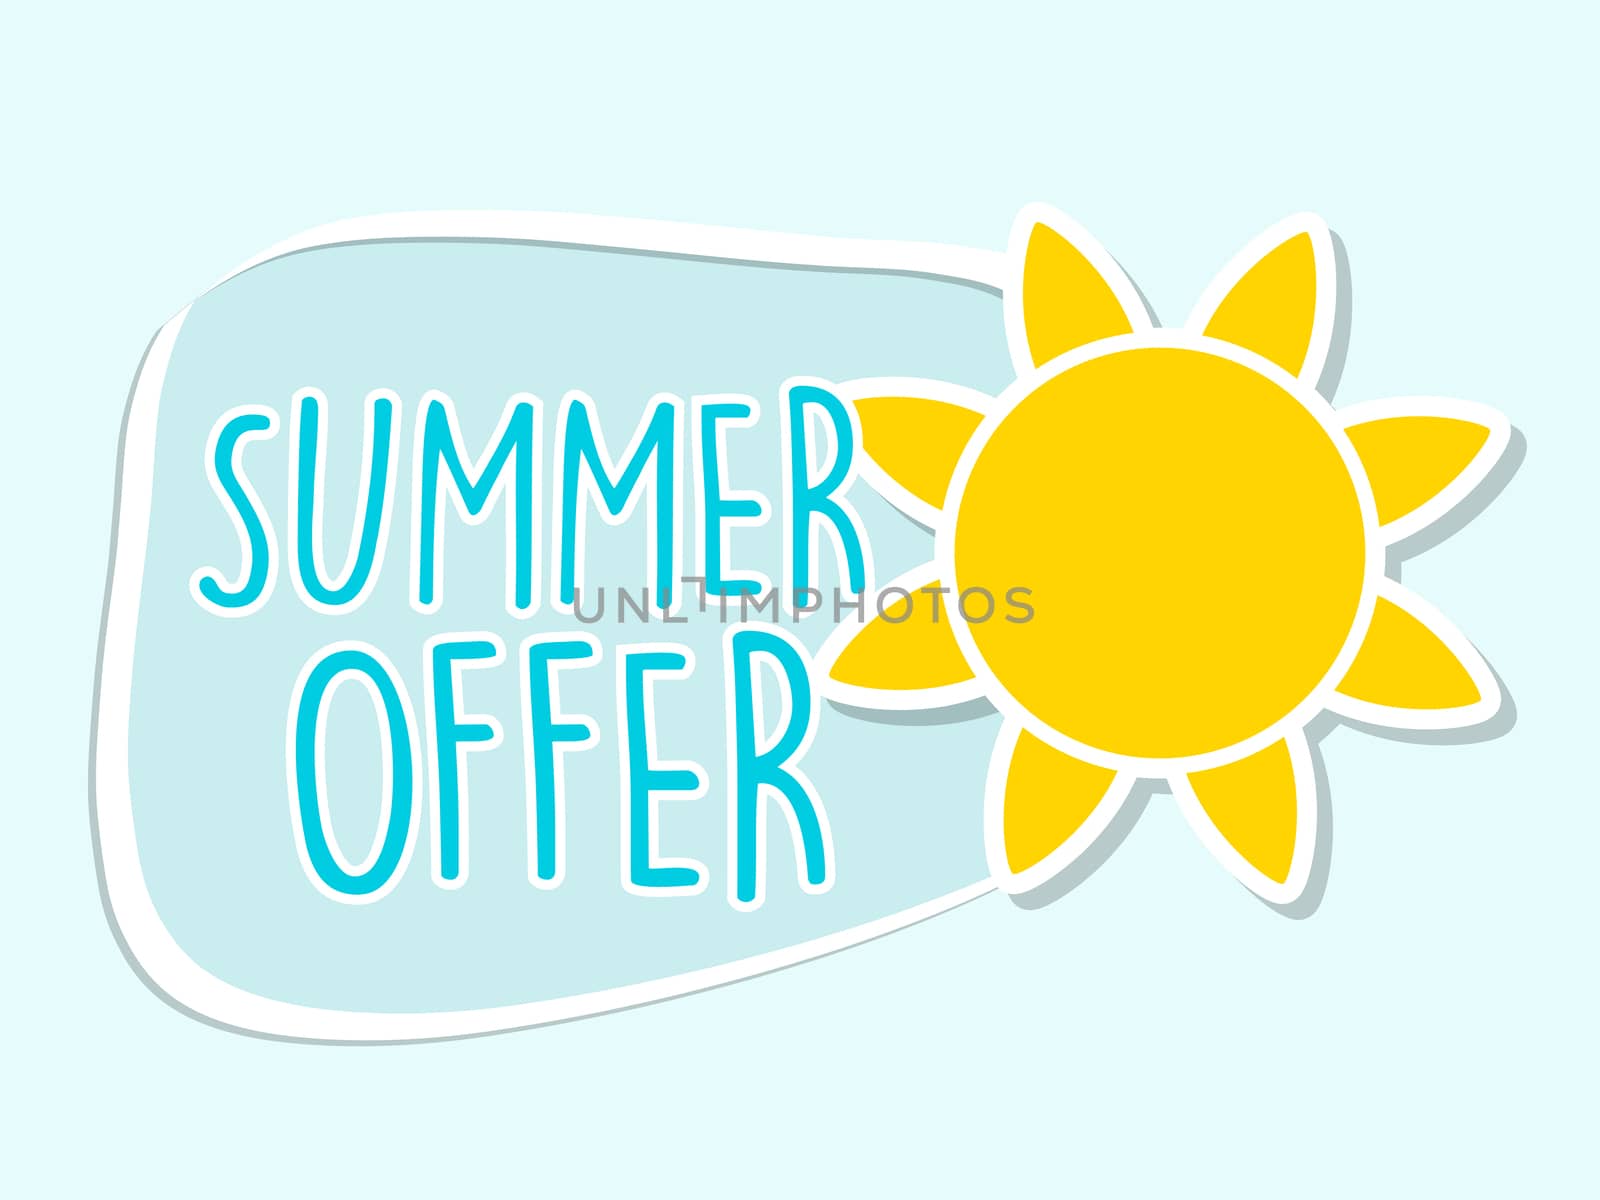 summer offer with yellow sun sign, blue flat design label, business seasonal shopping concept